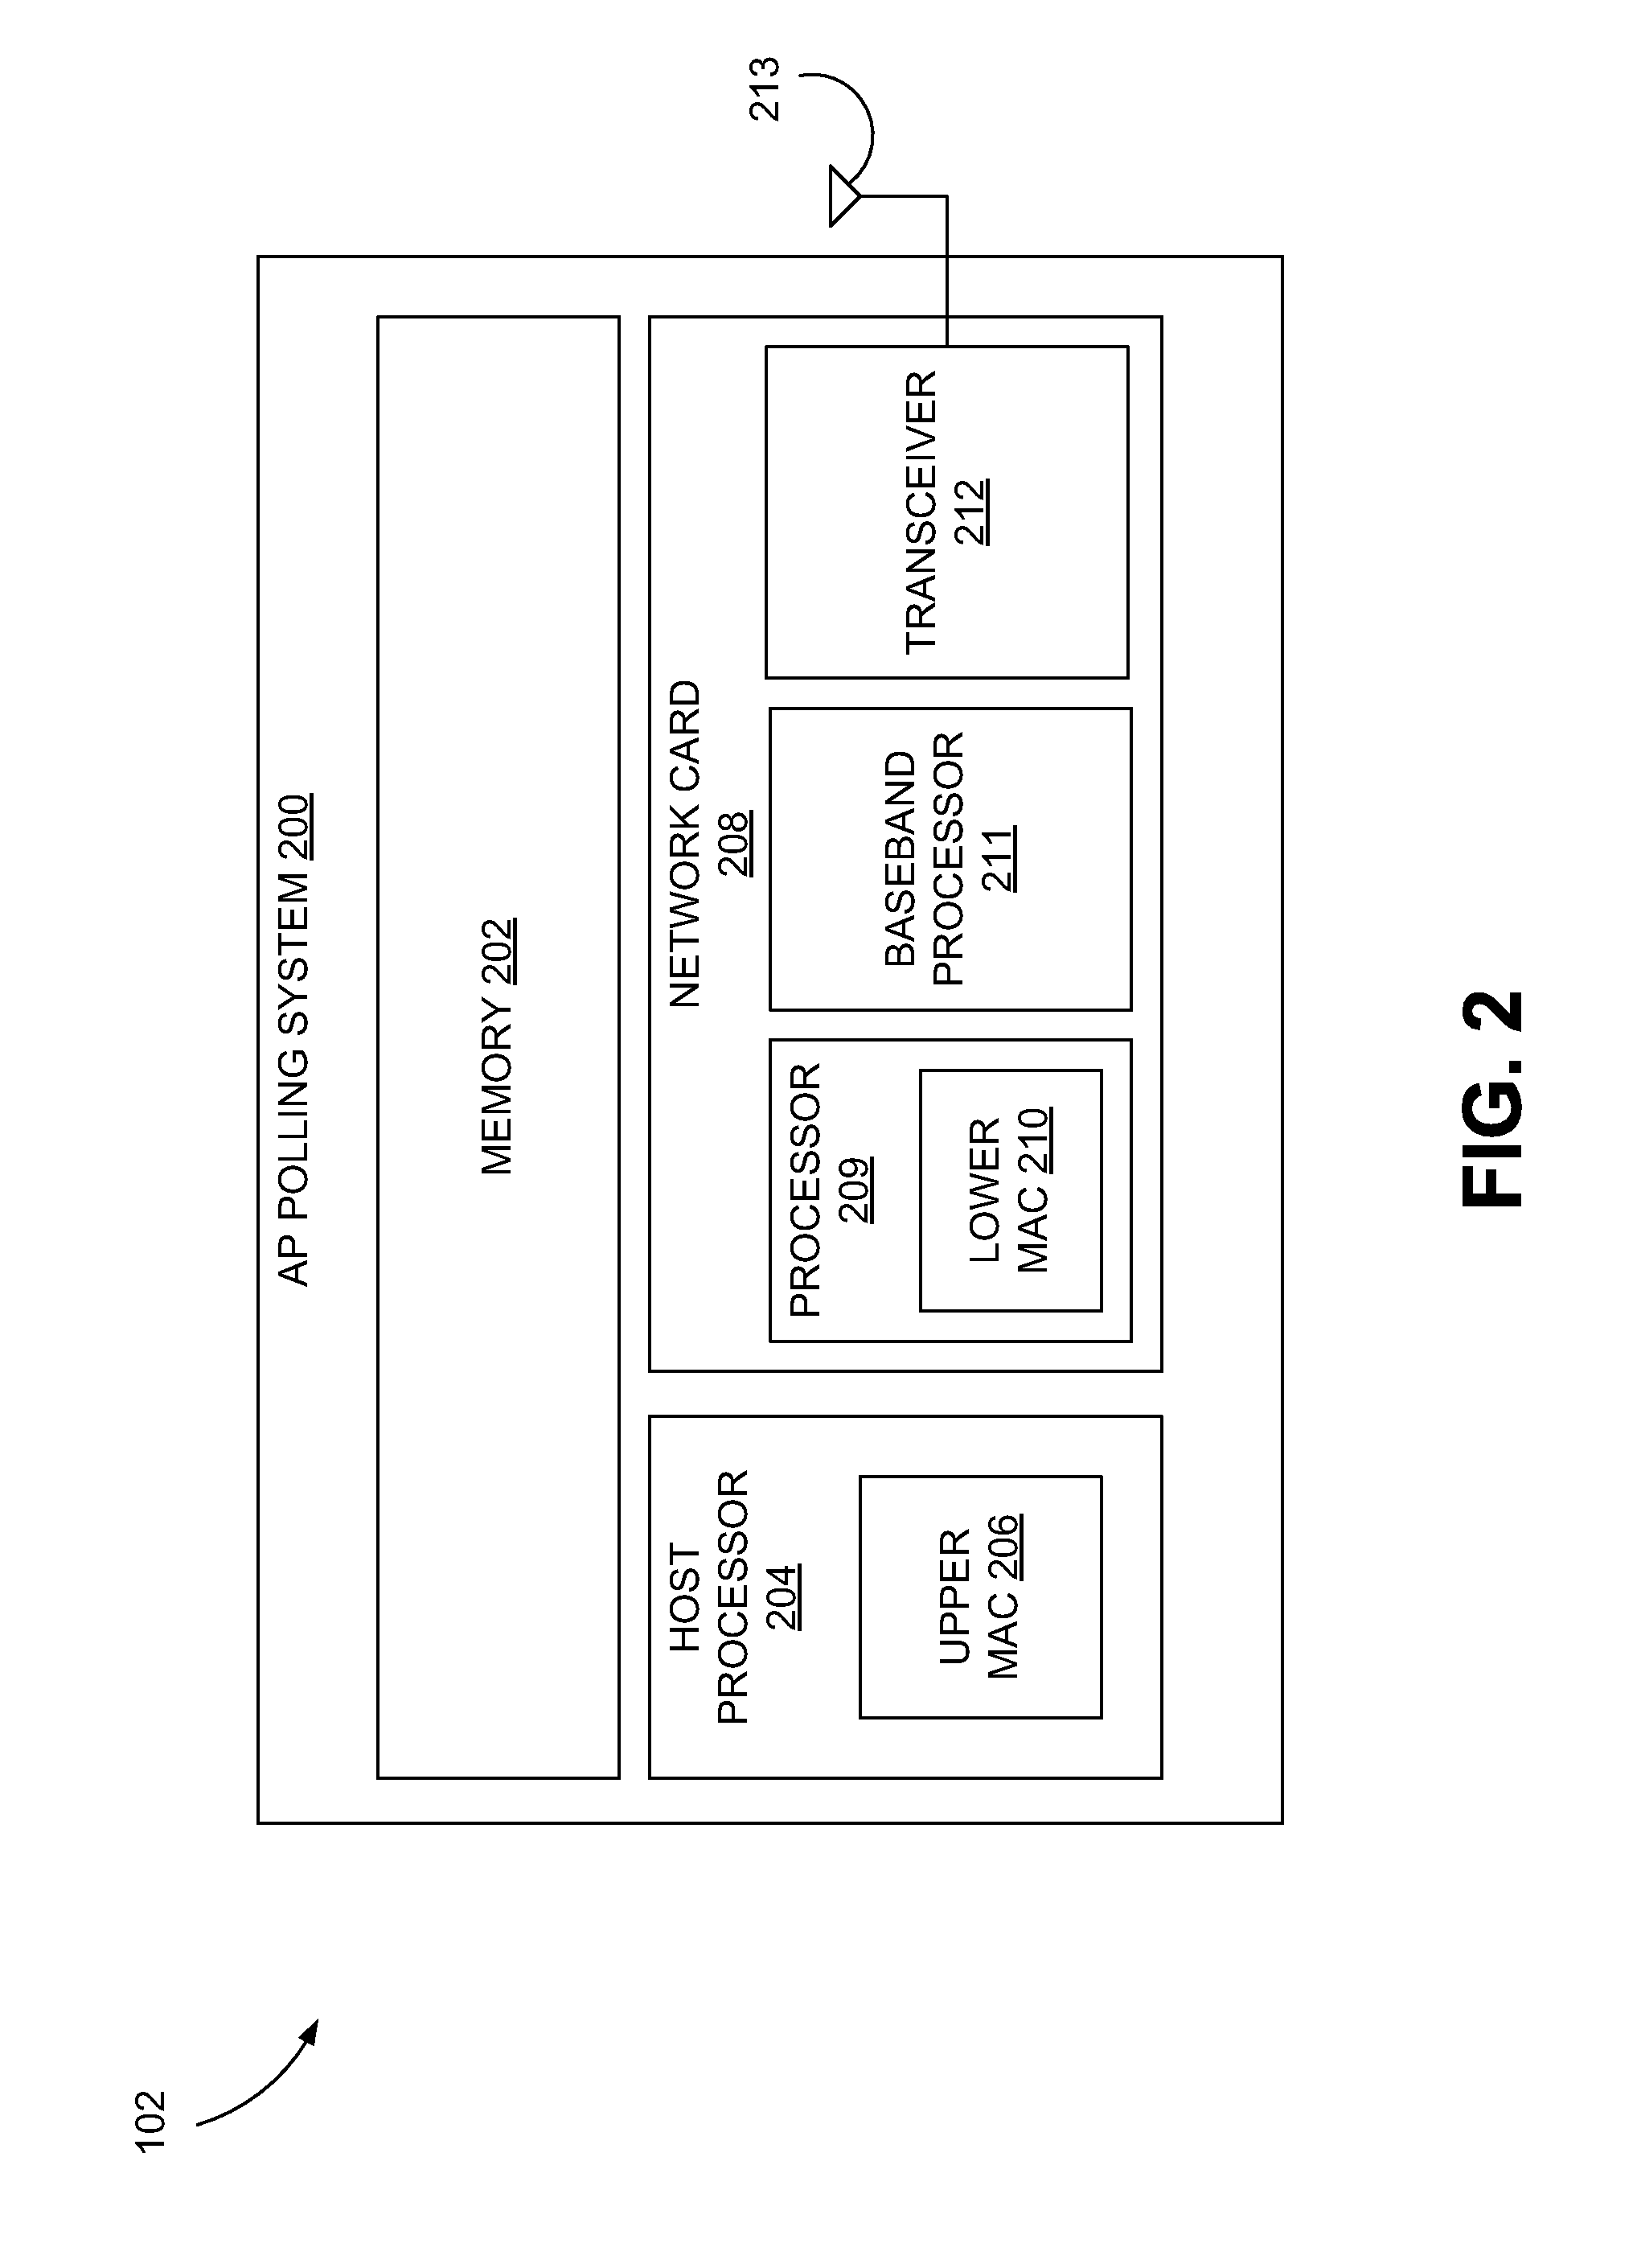 Access Point Polling Systems and Methods